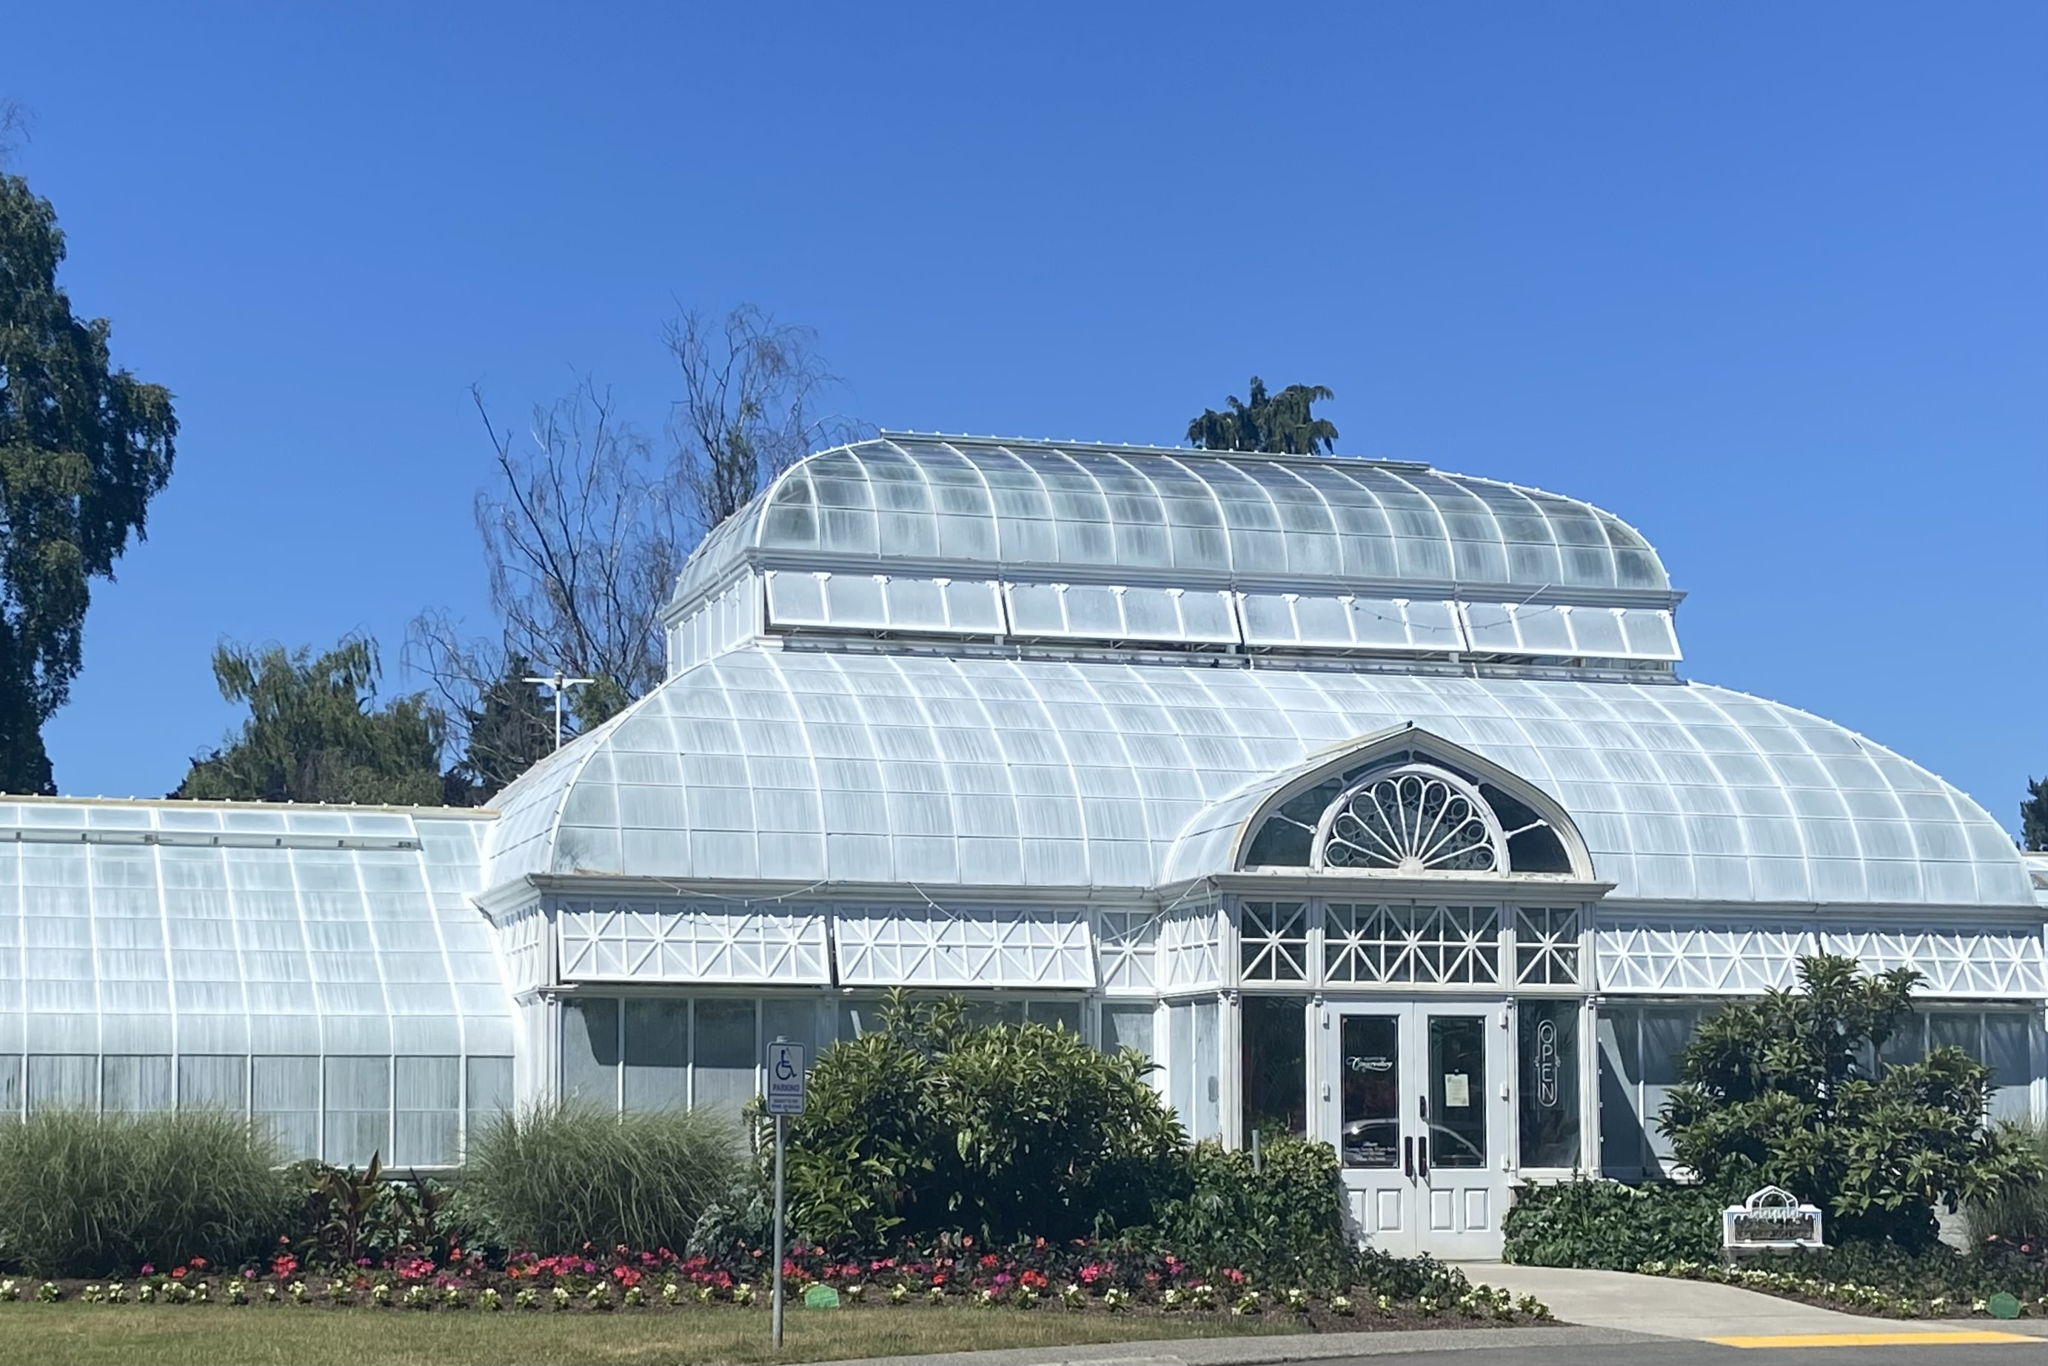 Connect with nature at the historic Volunteer Park conservatory